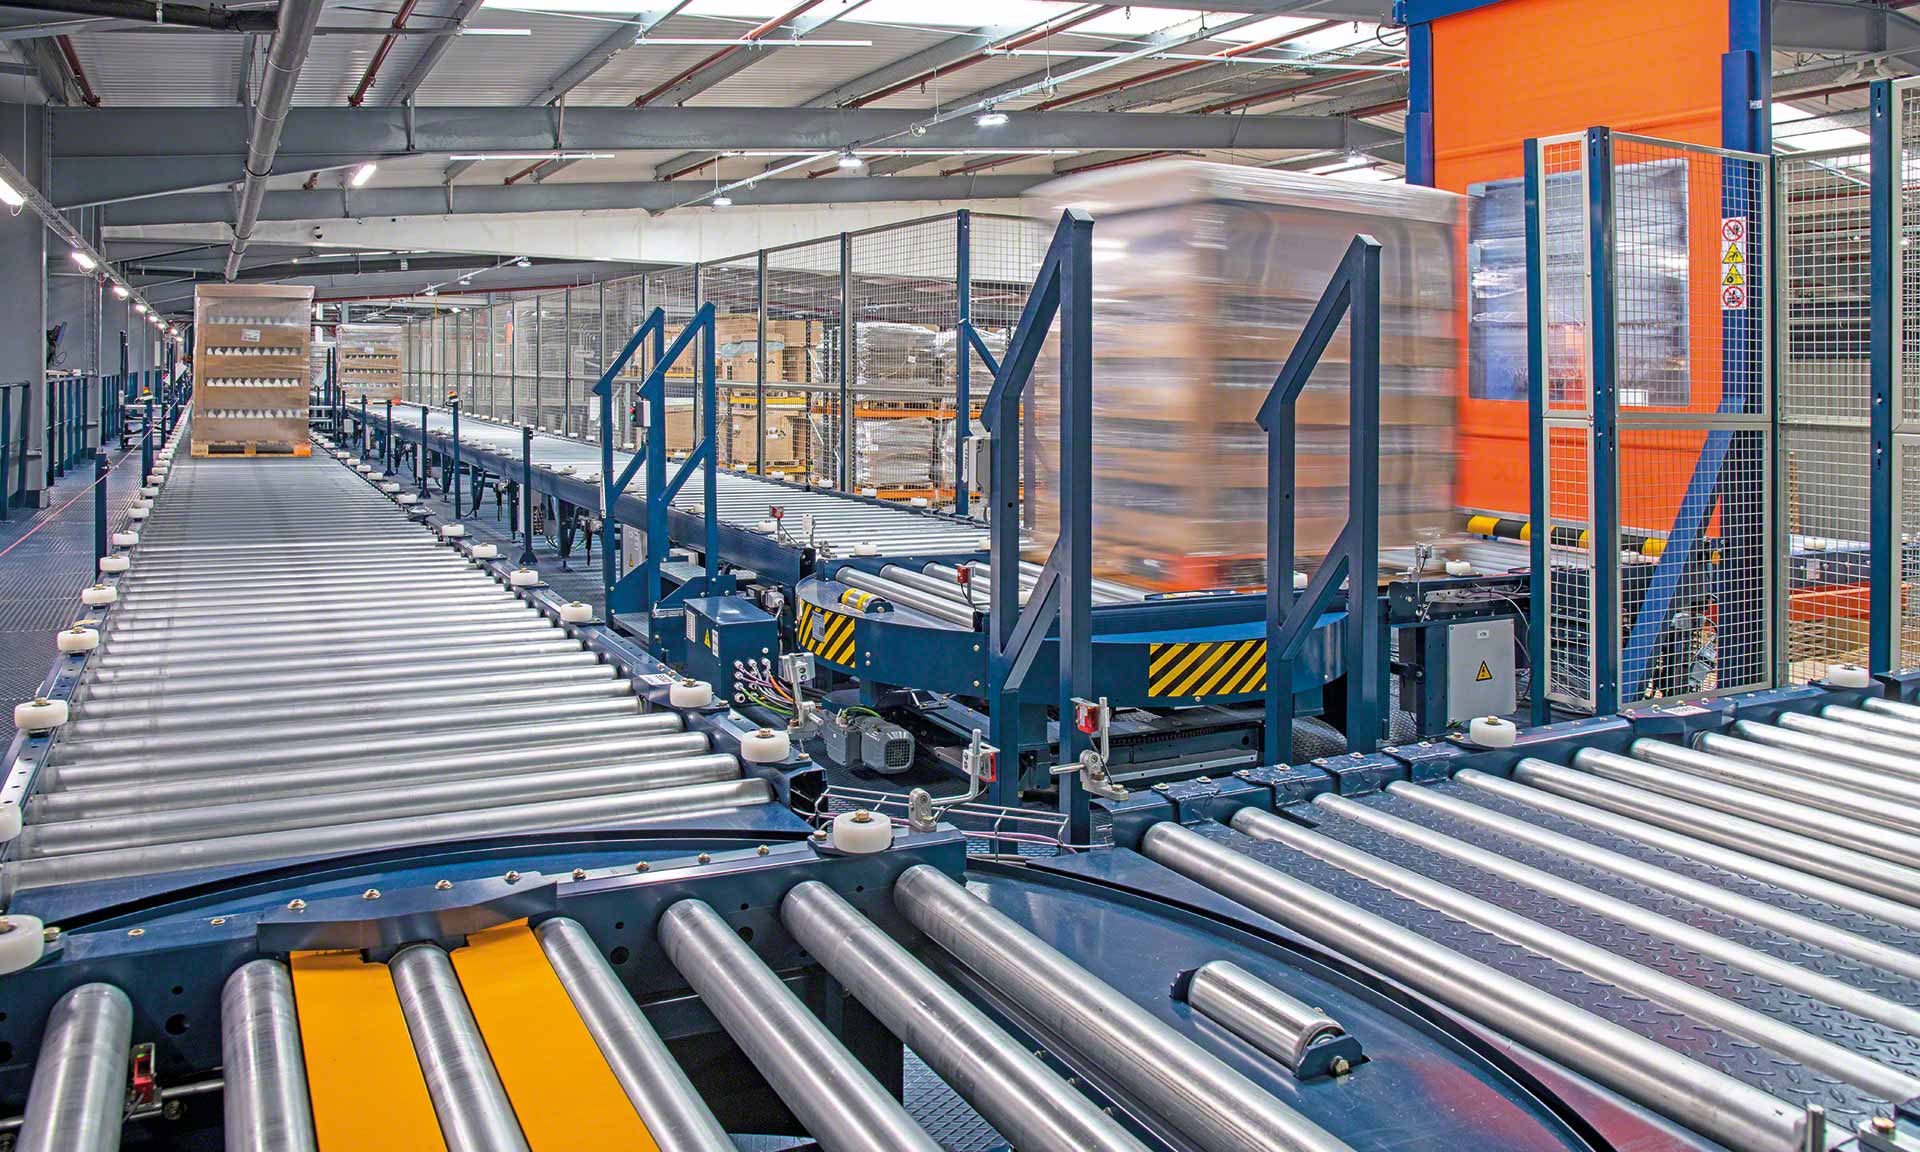 Conveyor rollers and how they work